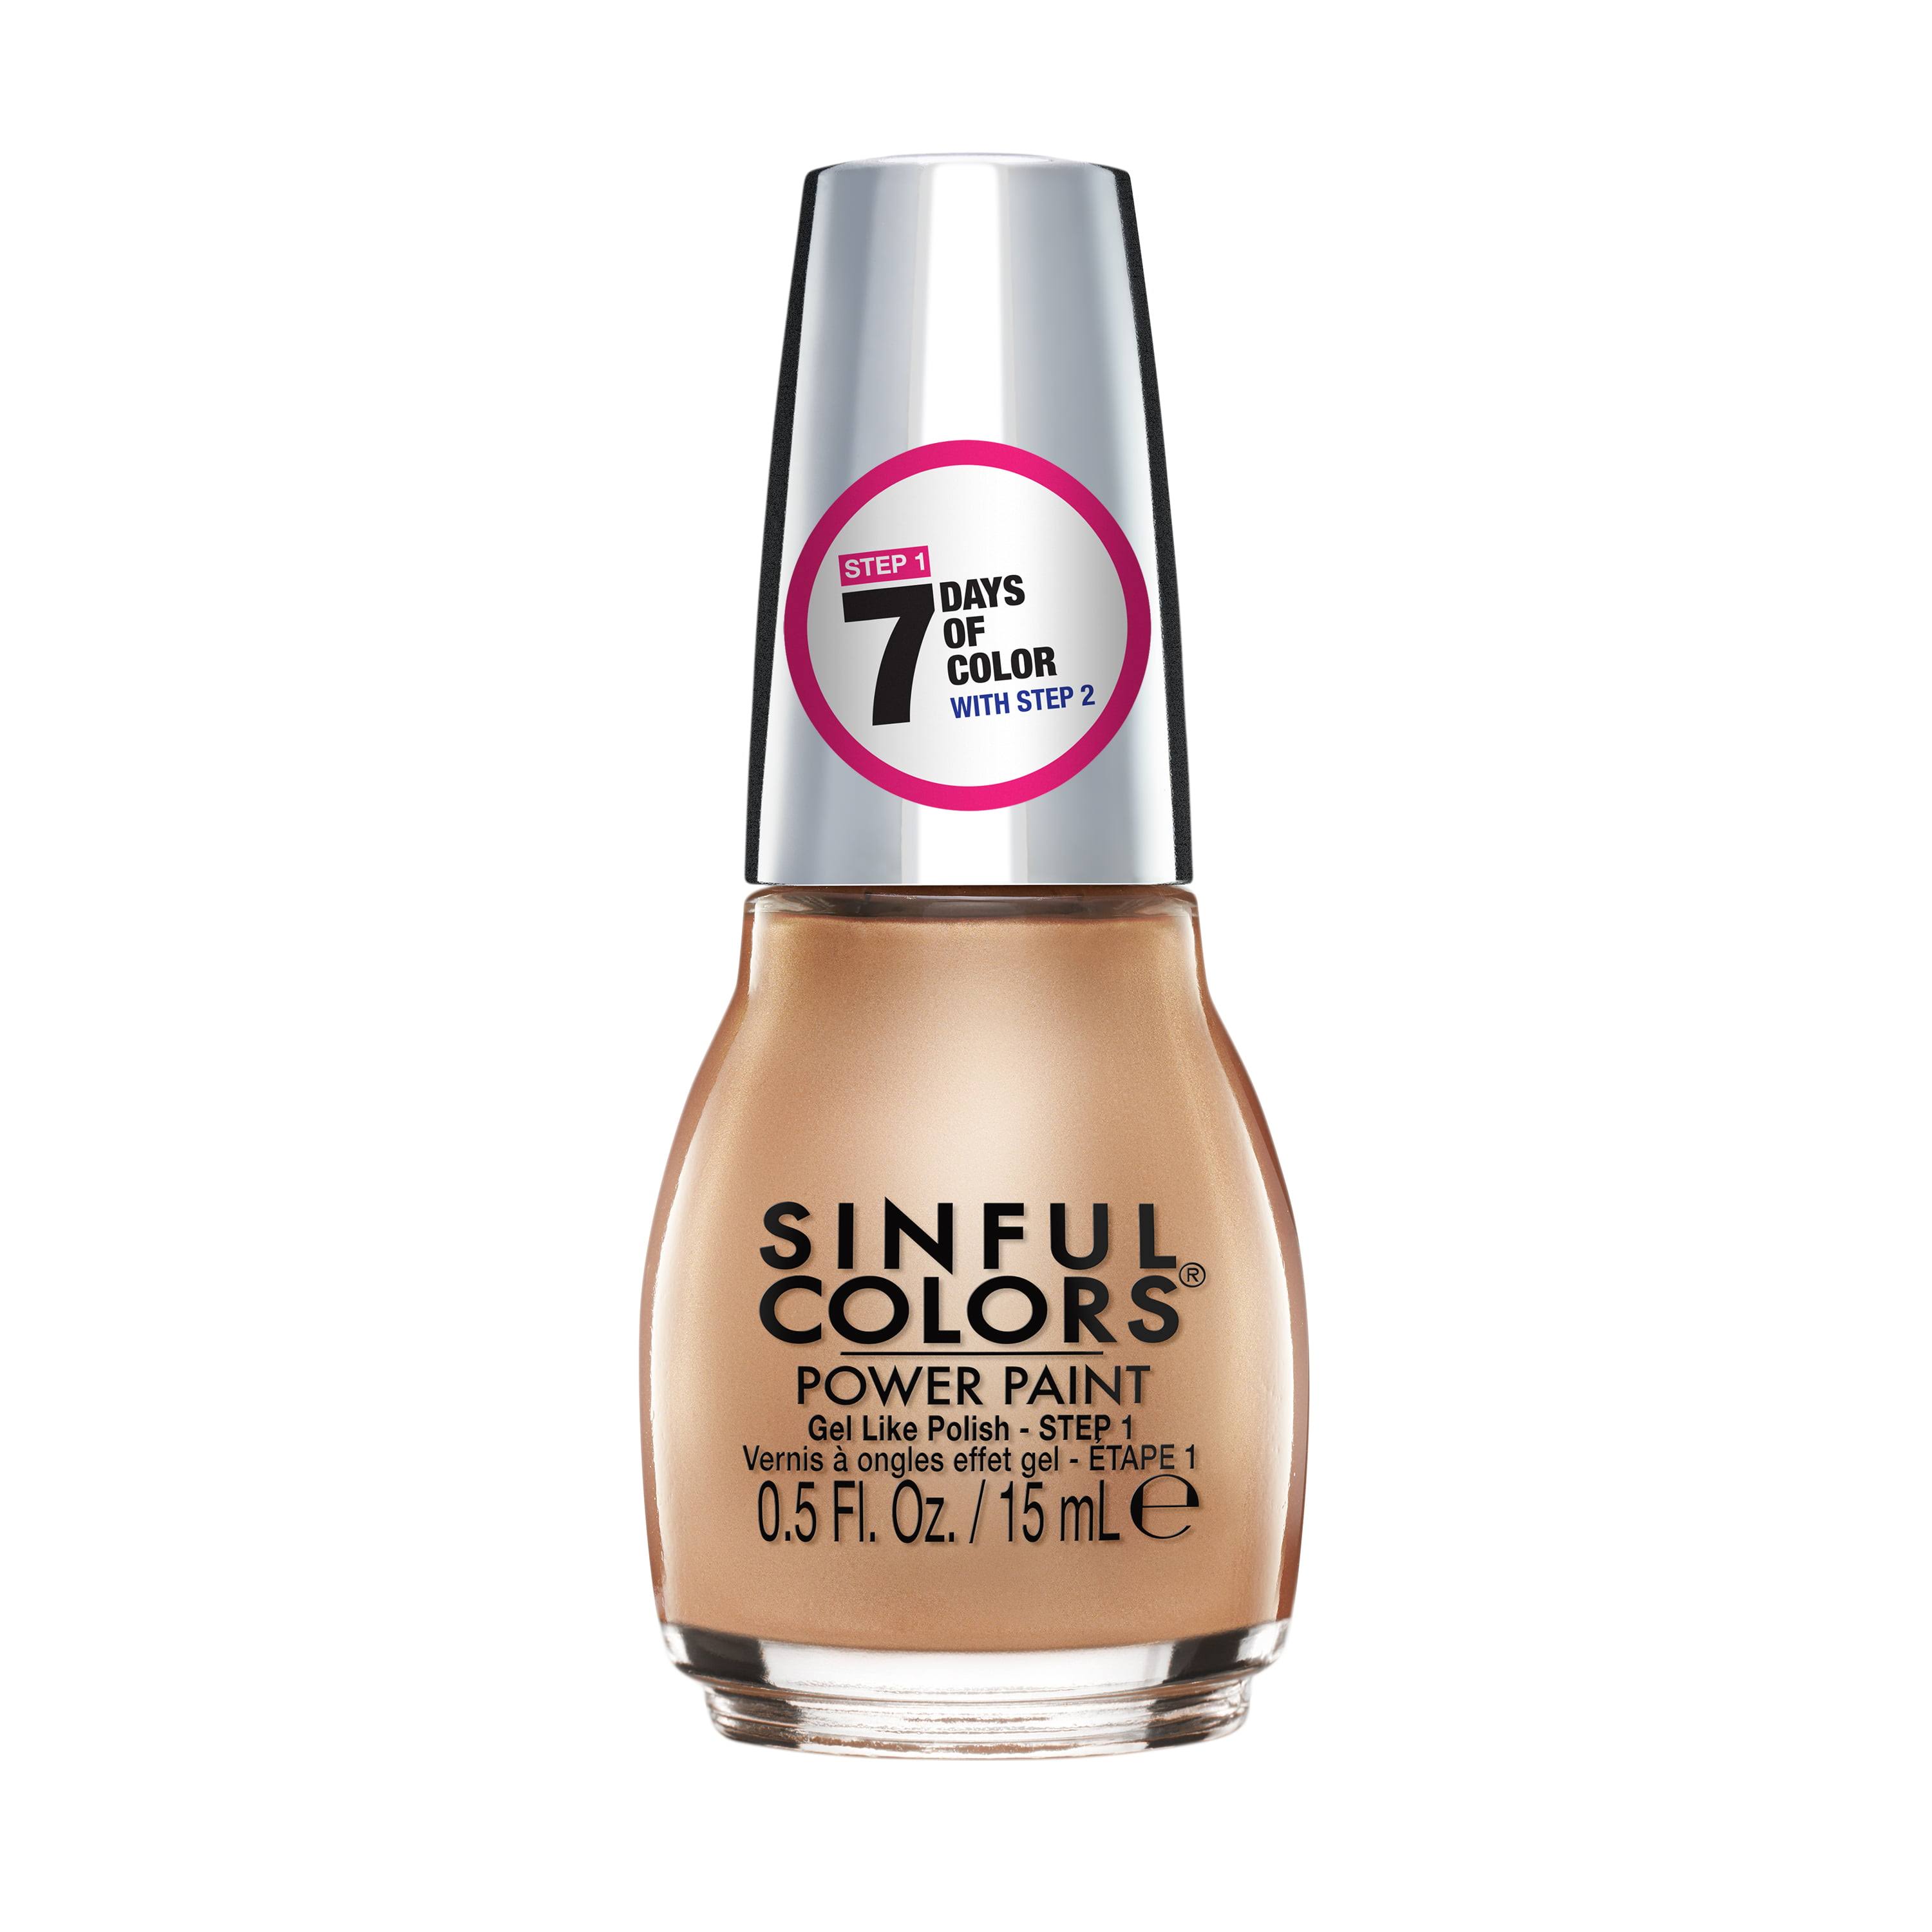 SinfulColors Nail Color, 24K Drips 2644 - 0.5 fl oz